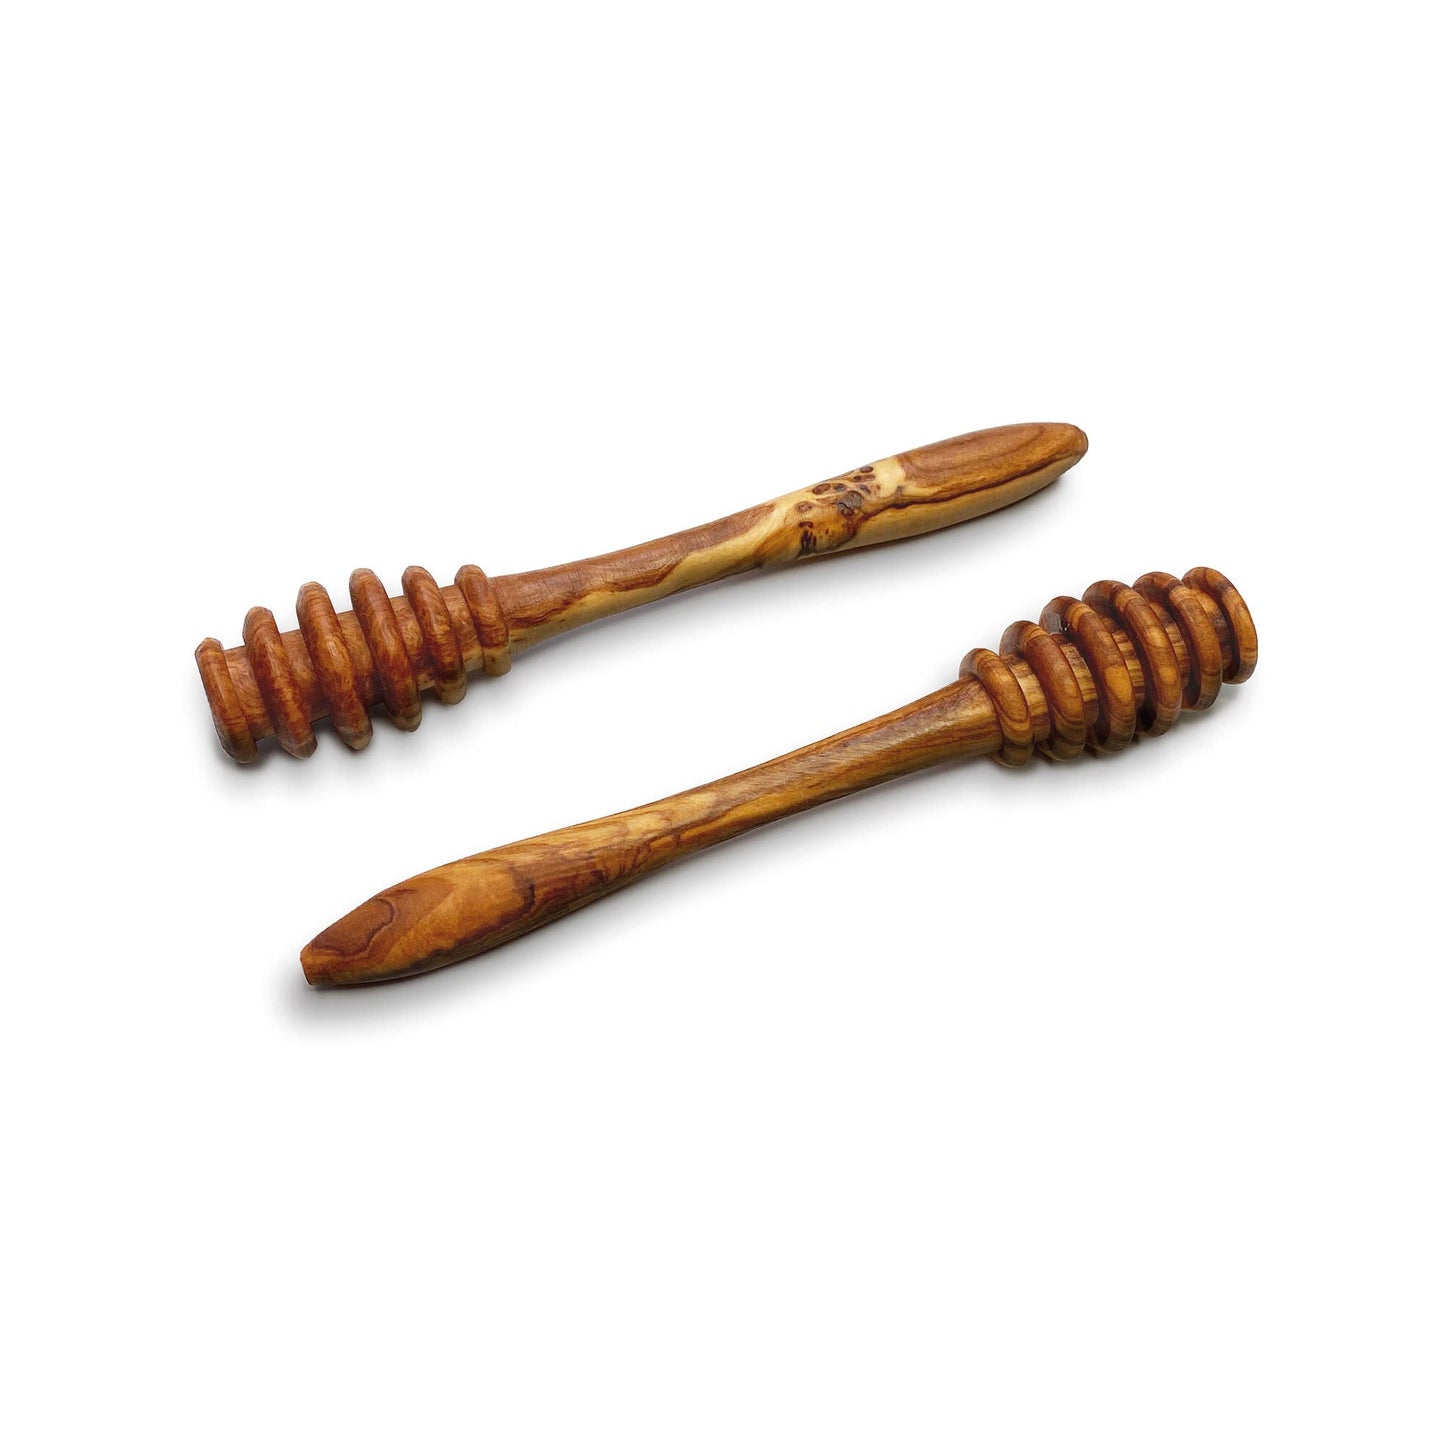 Olive wood Honey Stick/Dipper 5.5 inches